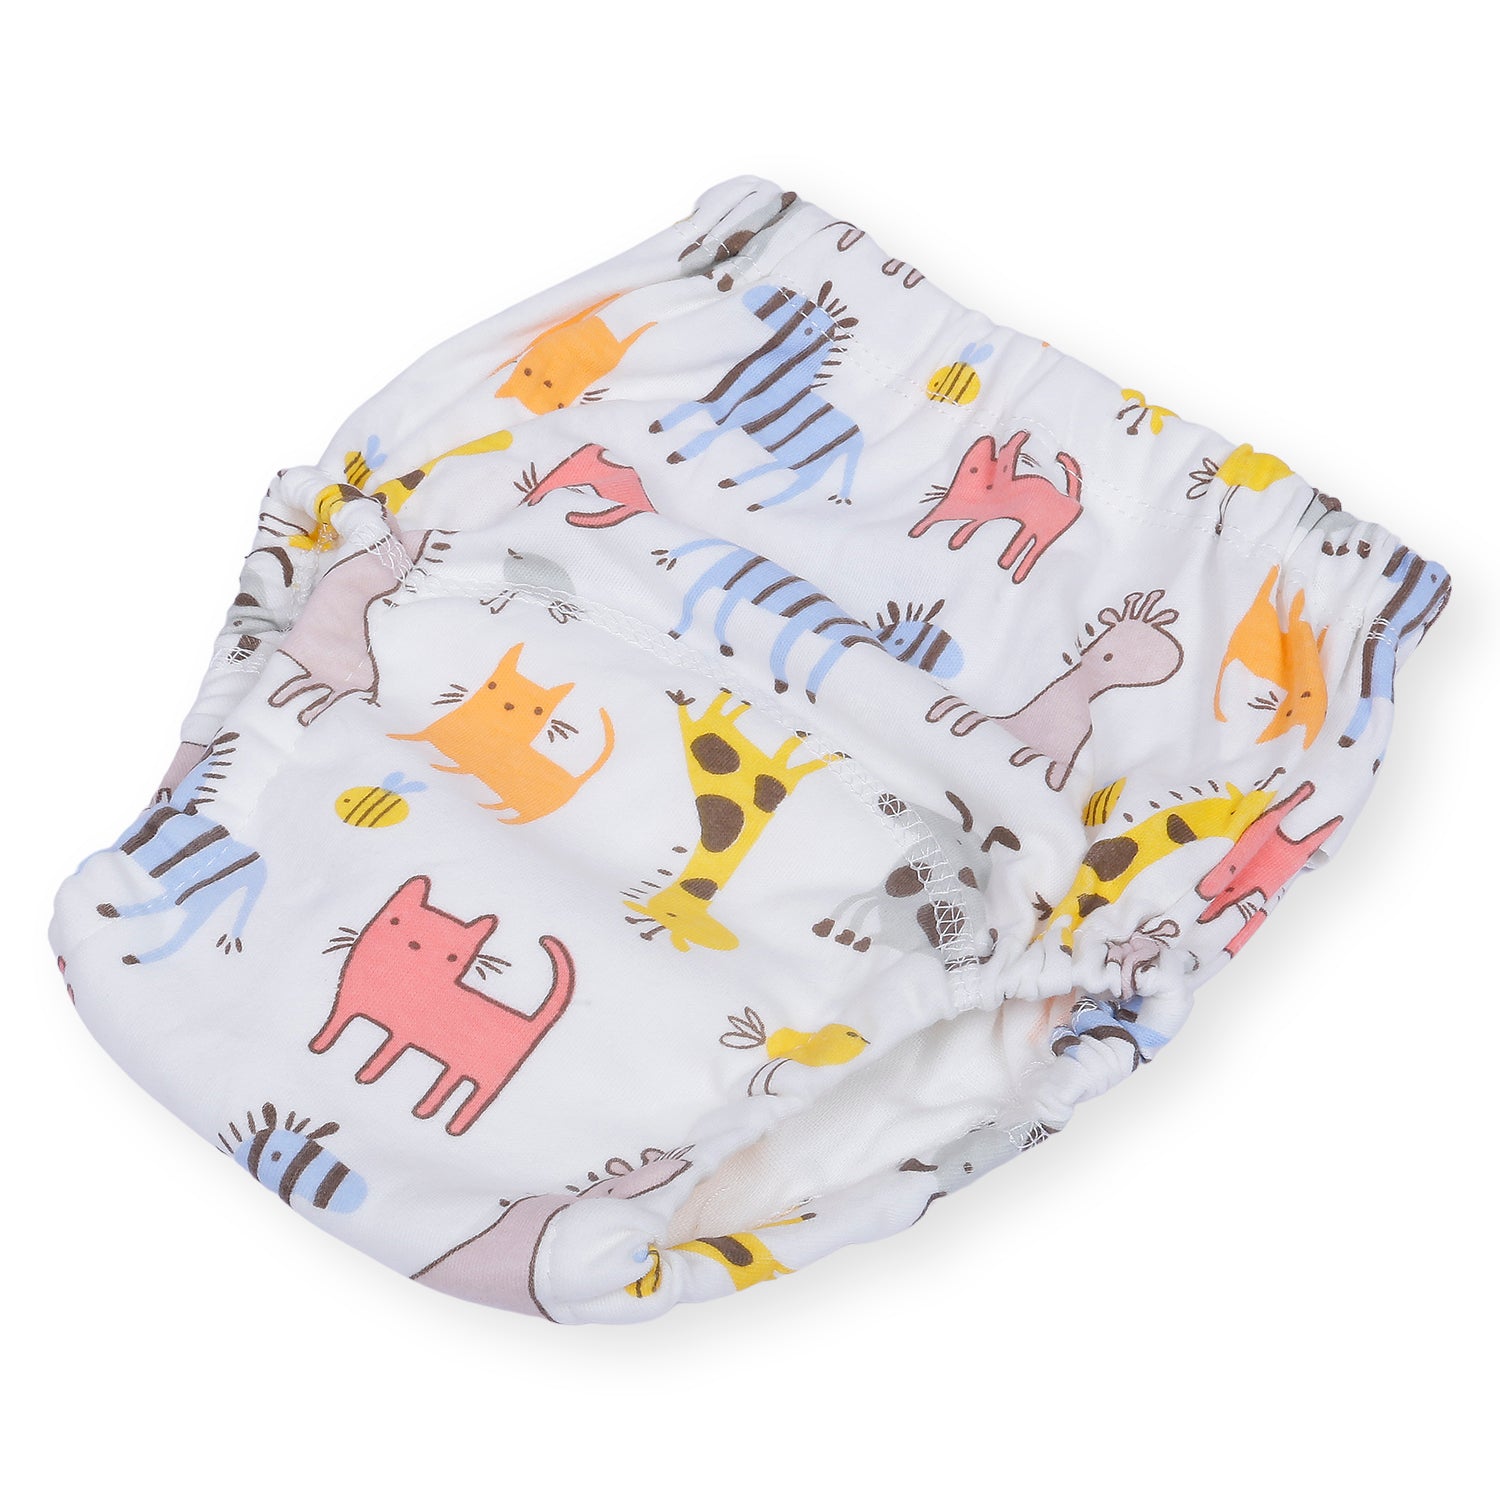 Wild Animals Reusable Cloth Training Pants Clothing Accessory Diaper Panty - Multicolour